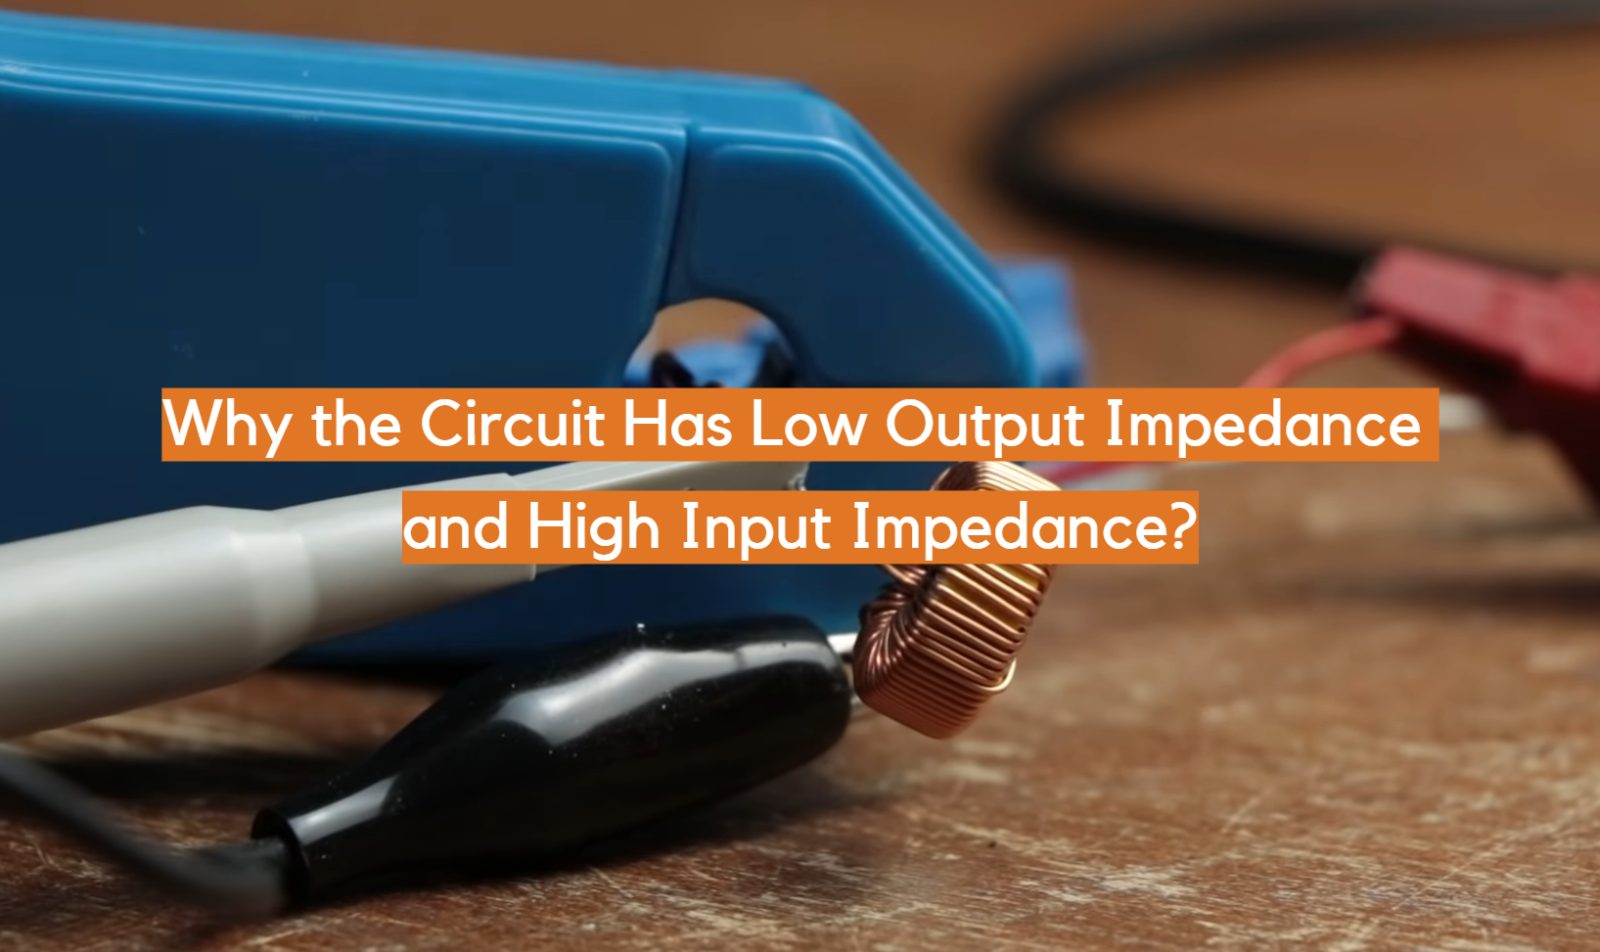 Why the Circuit Has Low Output Impedance and High Input Impedance?